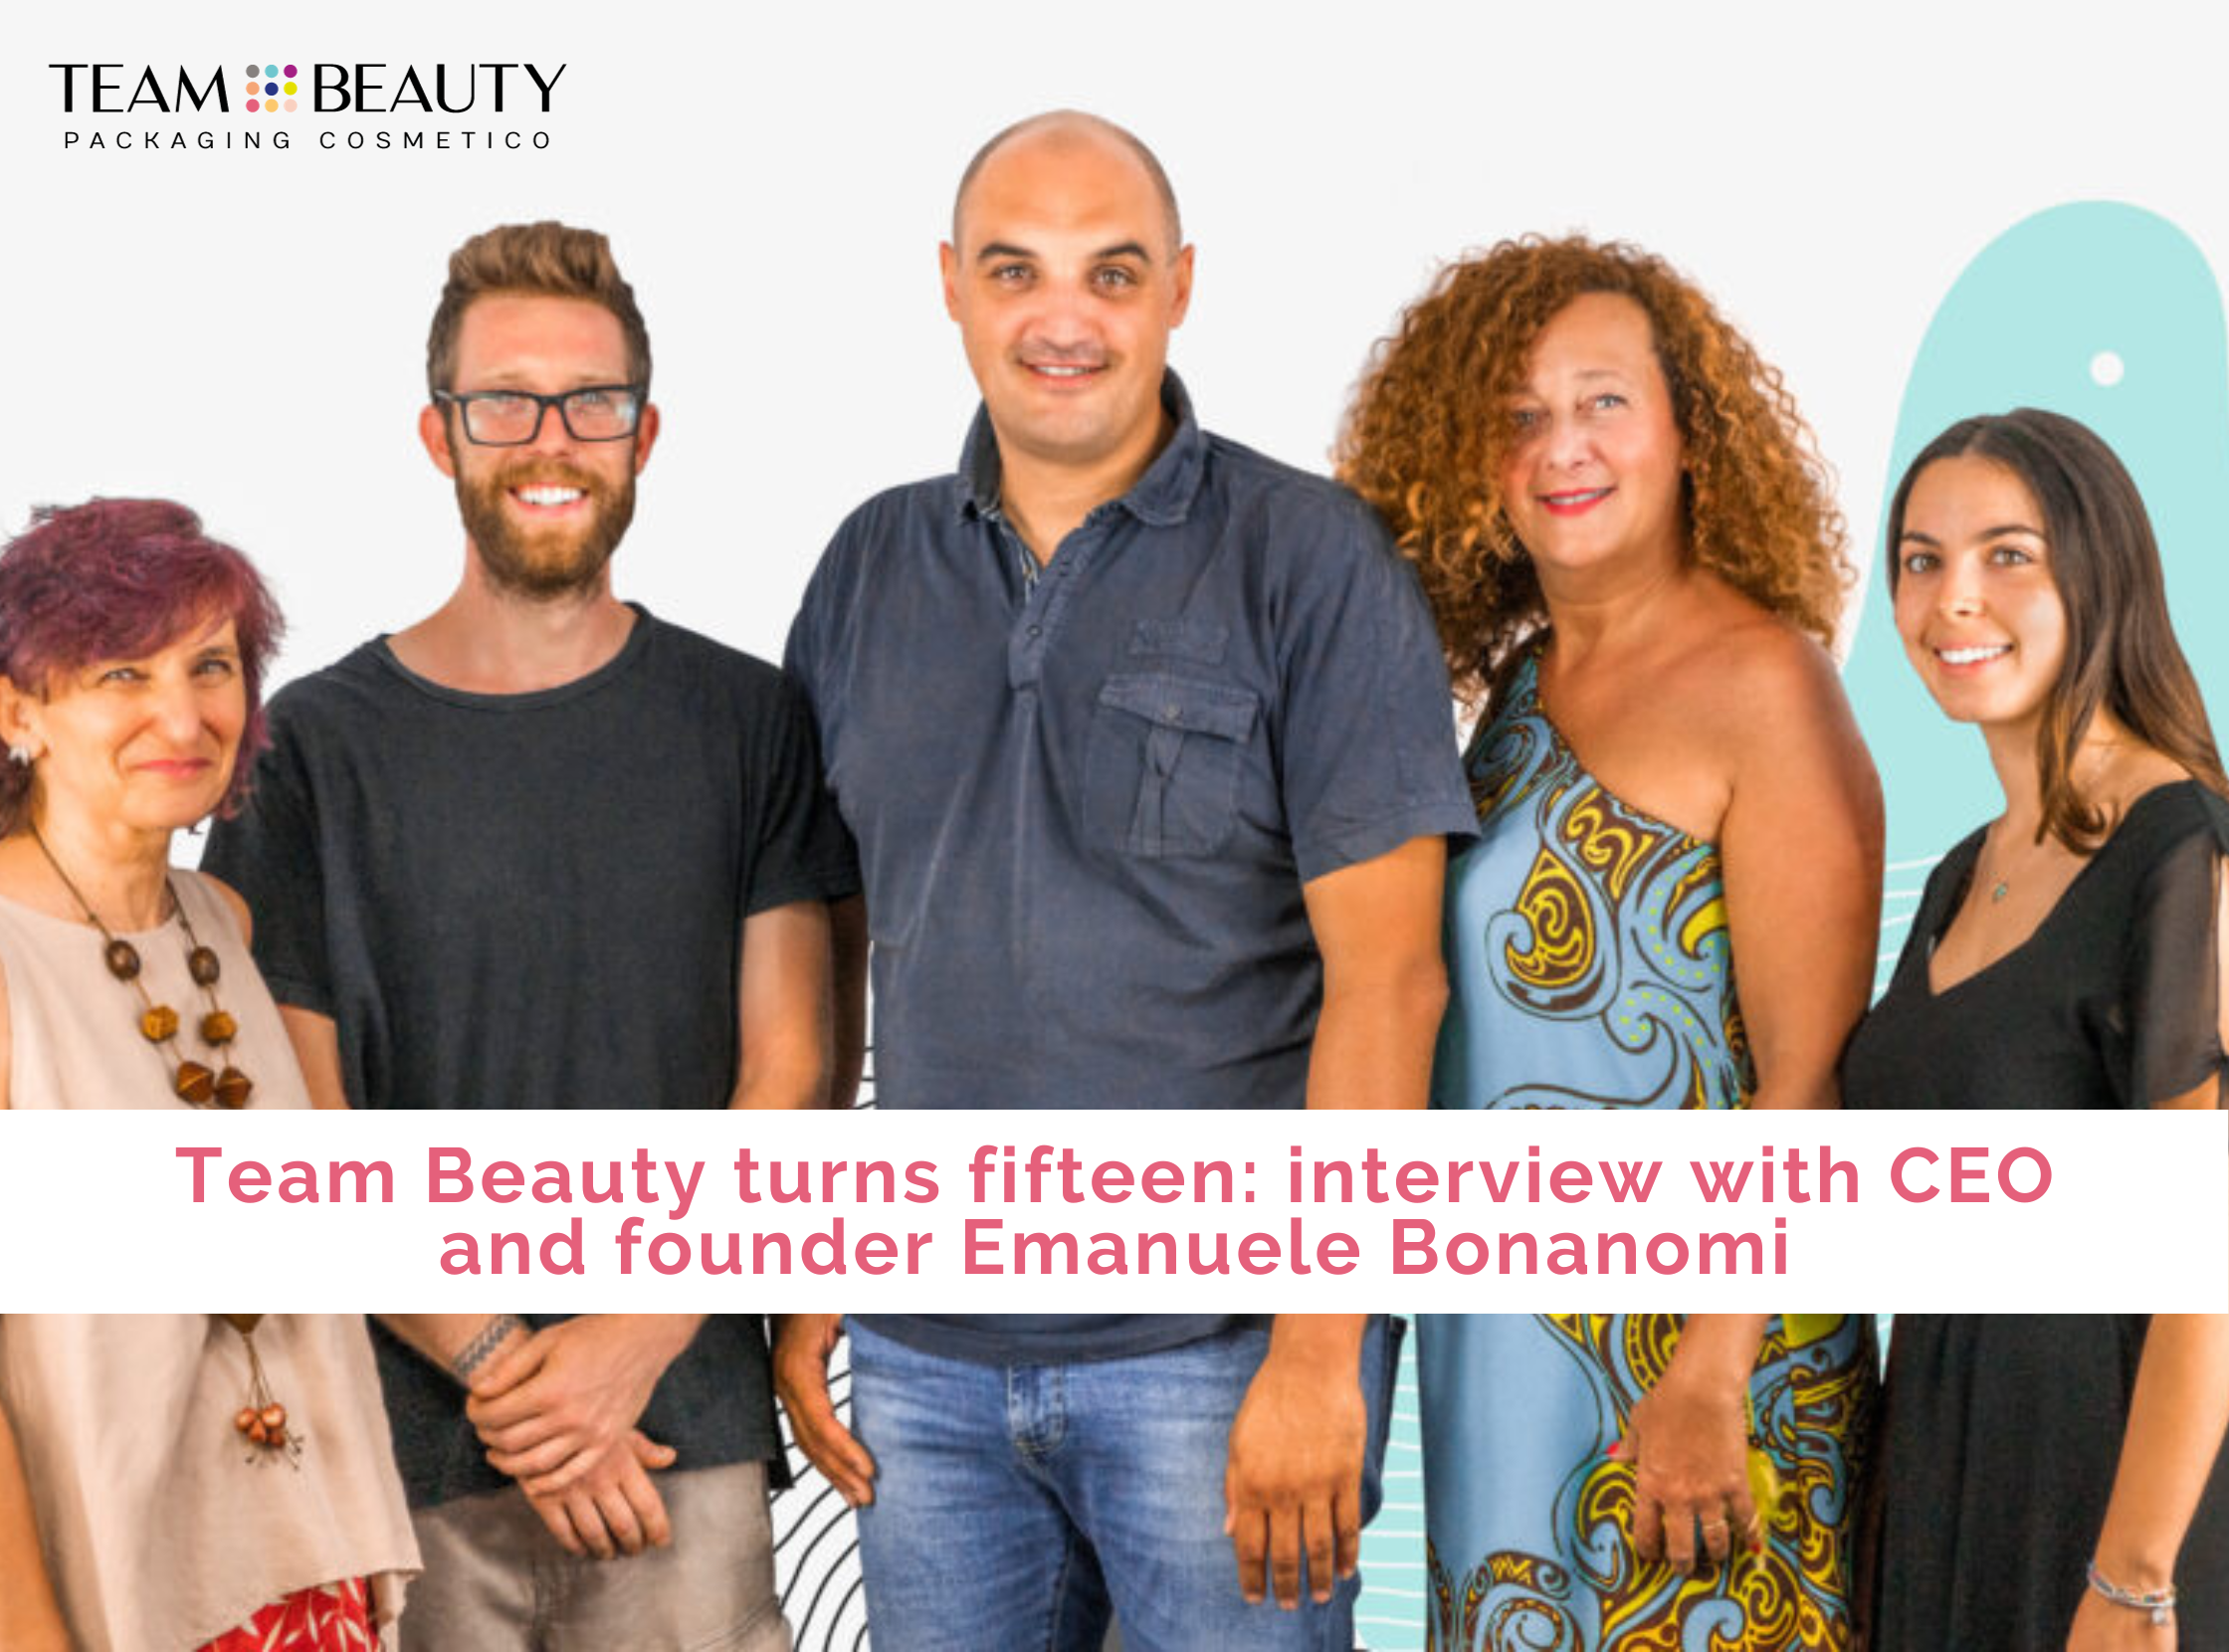 Team Beauty turns fifteen: interview with CEO and founder Emanuele Bonanomi